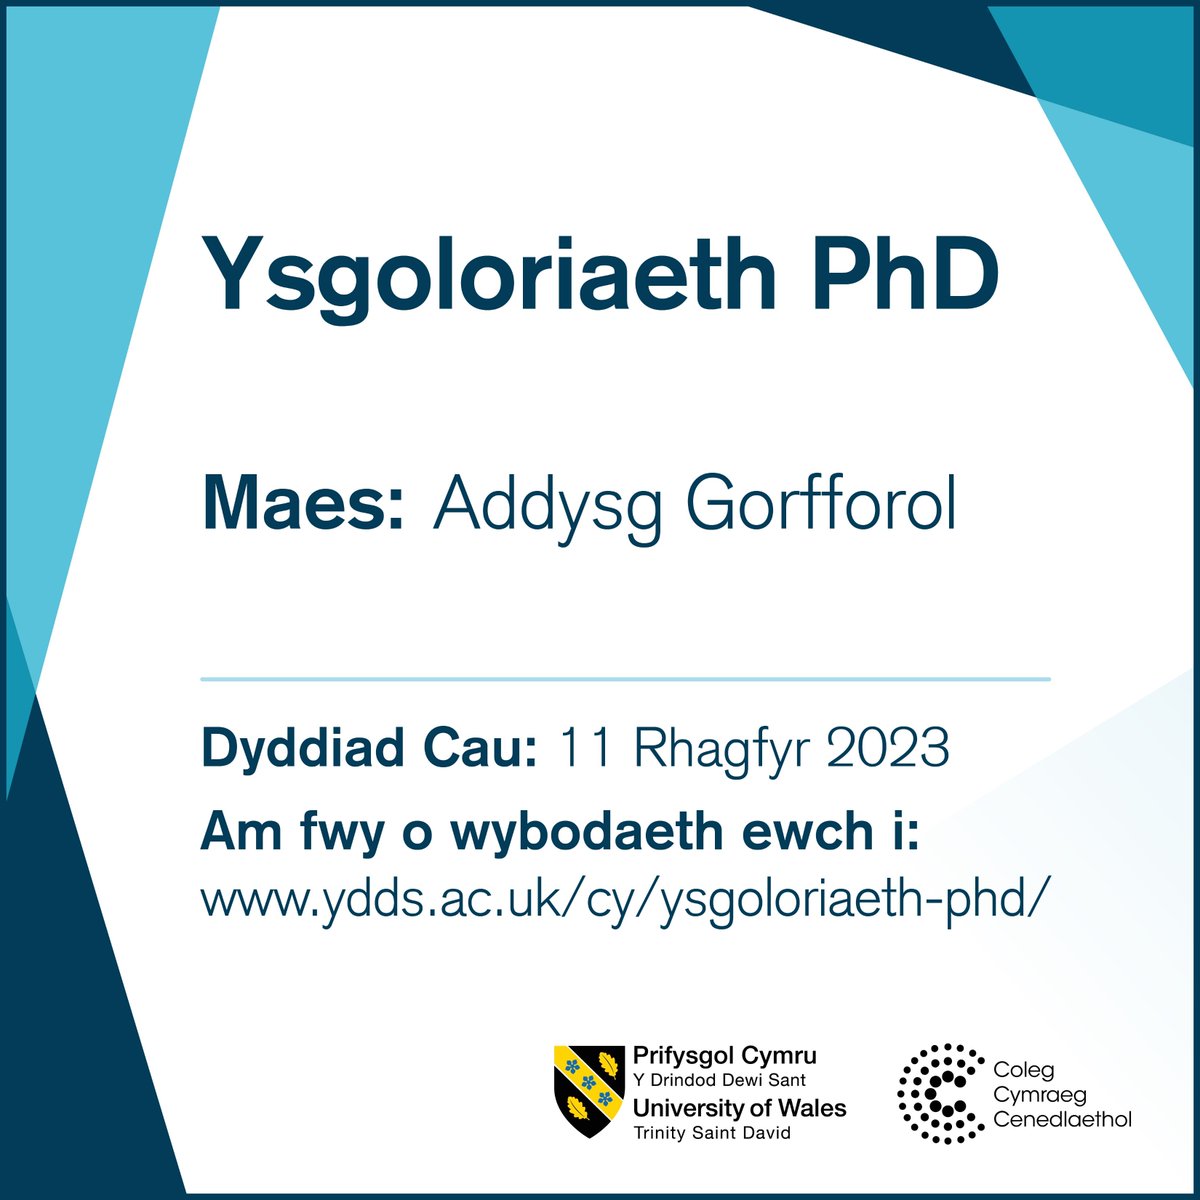 We are delighted to announce that the Institute of Management and Health has been successful in securing a PhD Scholarship in Physical Education under the sponsorship of the Coleg Cymraeg Cenedlaethol and we are now advertising for an applicant. 🤸 eu1.hubs.ly/H06mFCD0